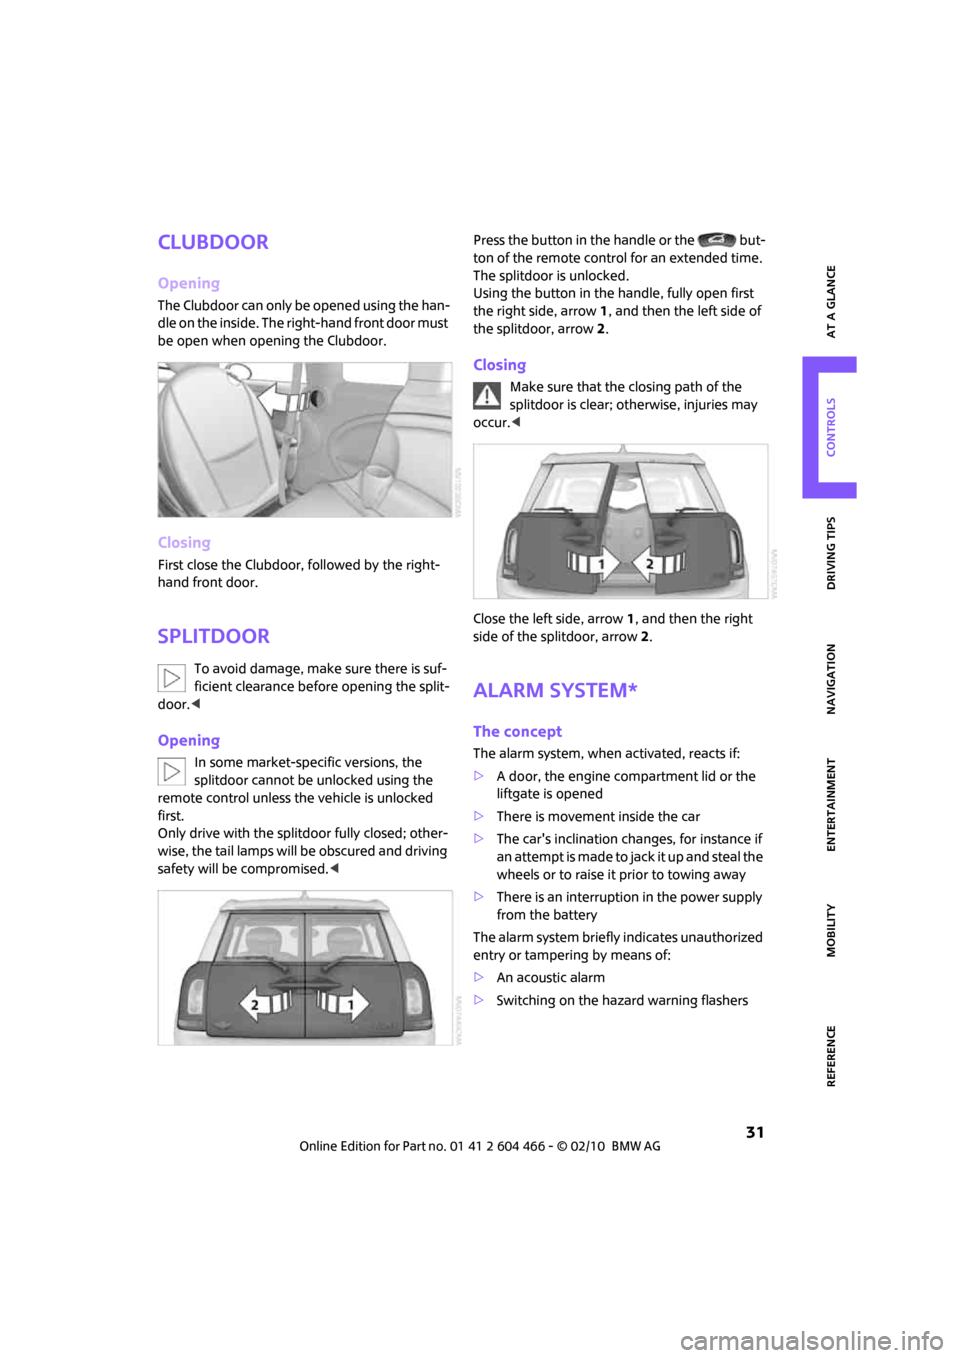 MINI Clubman 2010   (Mini Connected) Owners Guide MOBILITYAT A GLANCE CONTROLS DRIVING TIPS ENTERTAINMENT
 31
NAVIGATION REFERENCE
Clubdoor
Opening
The Clubdoor can only be opened using the han-
dle on the inside. The right-hand front door must 
be o